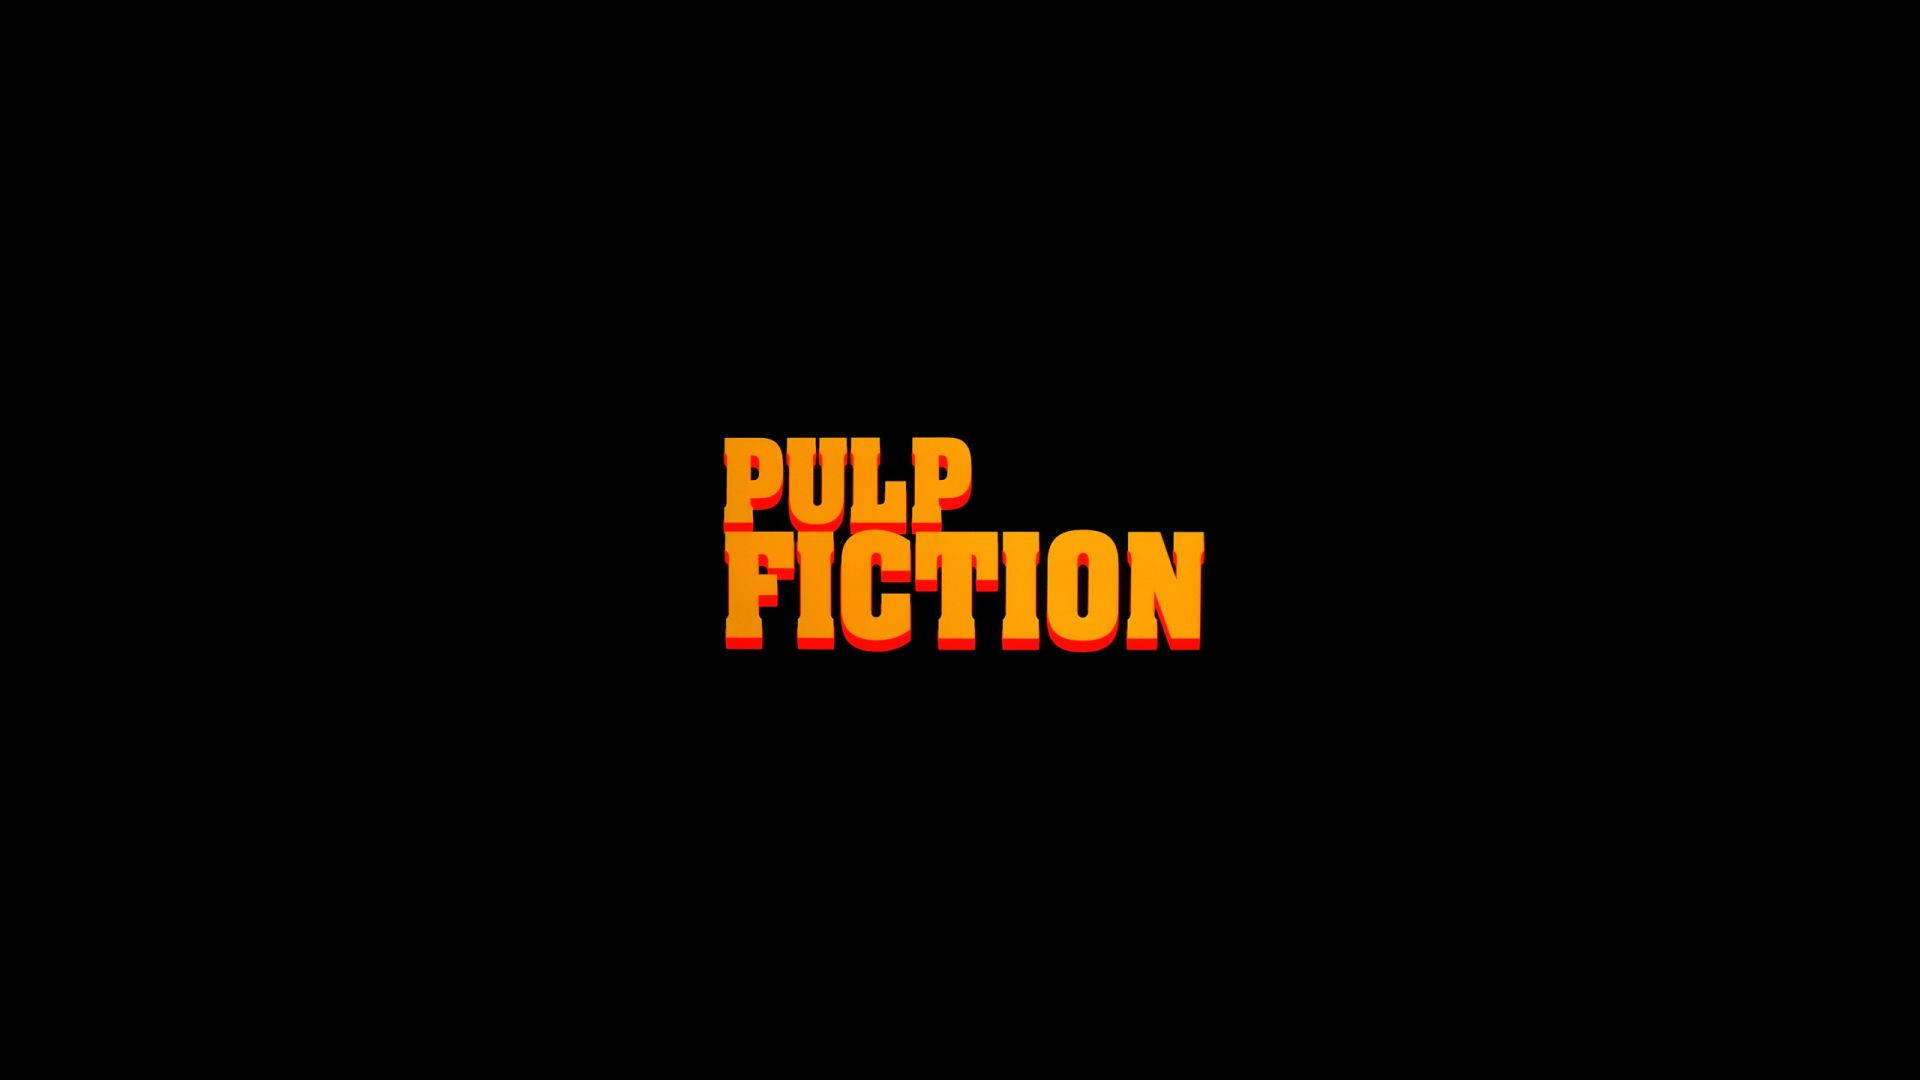 American Film Pulp Fiction Graphic Art Background